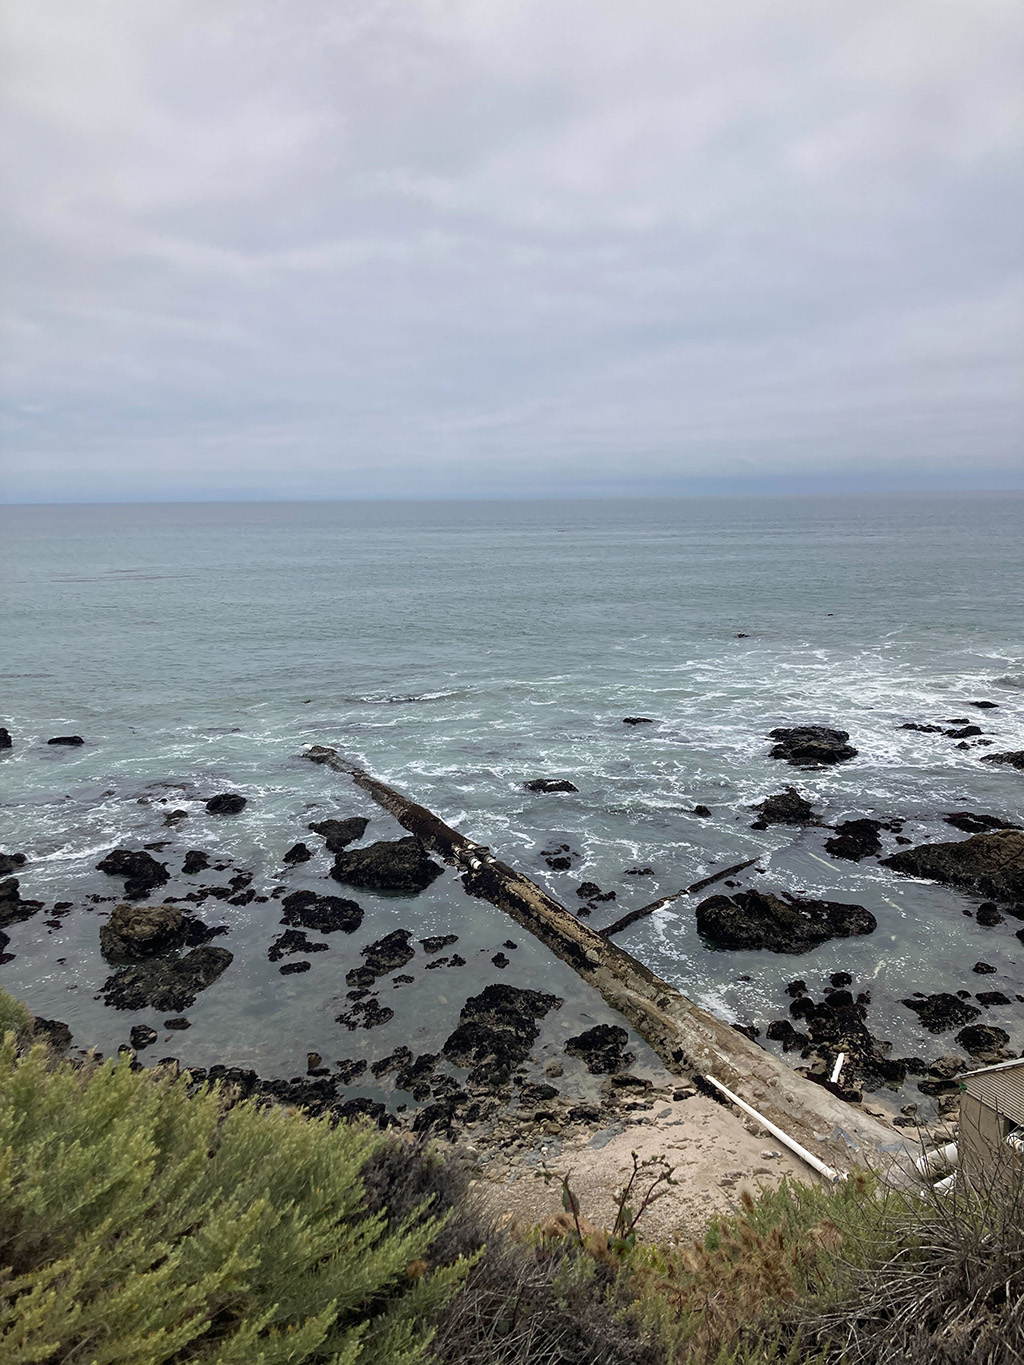 A black pipe extends into the gray of the Pacific Ocean, past greenery, then sand, then dark rocks in the surf. The sky is overcast and fades into the horizon.